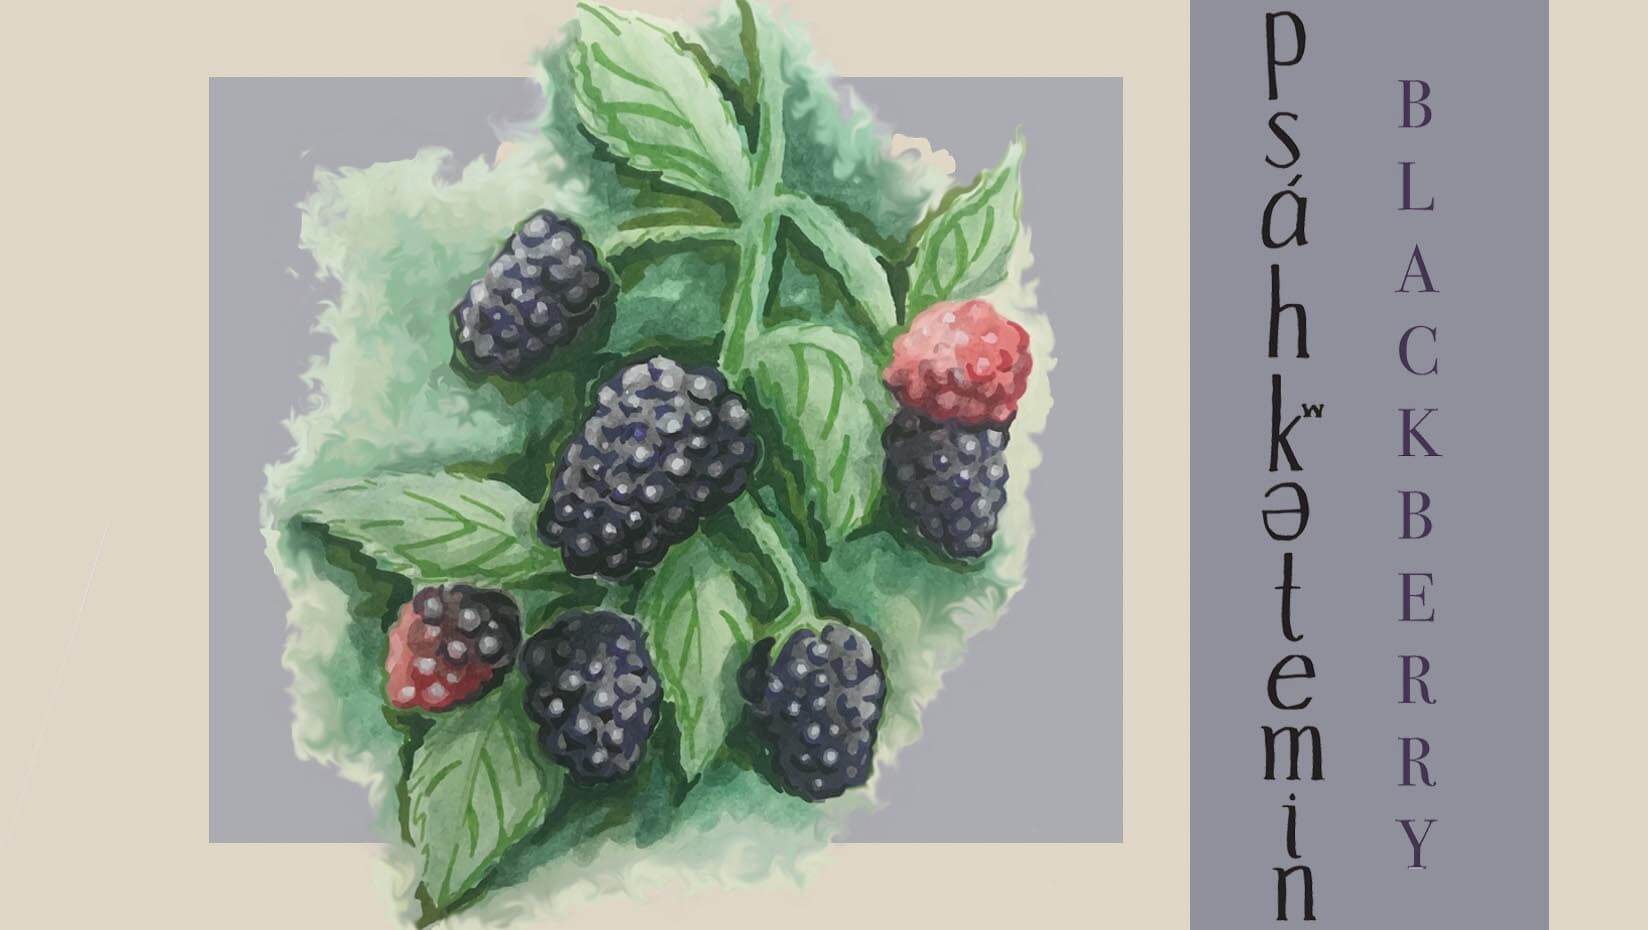 An image of an edible landscape trail sign featuring black raspberries